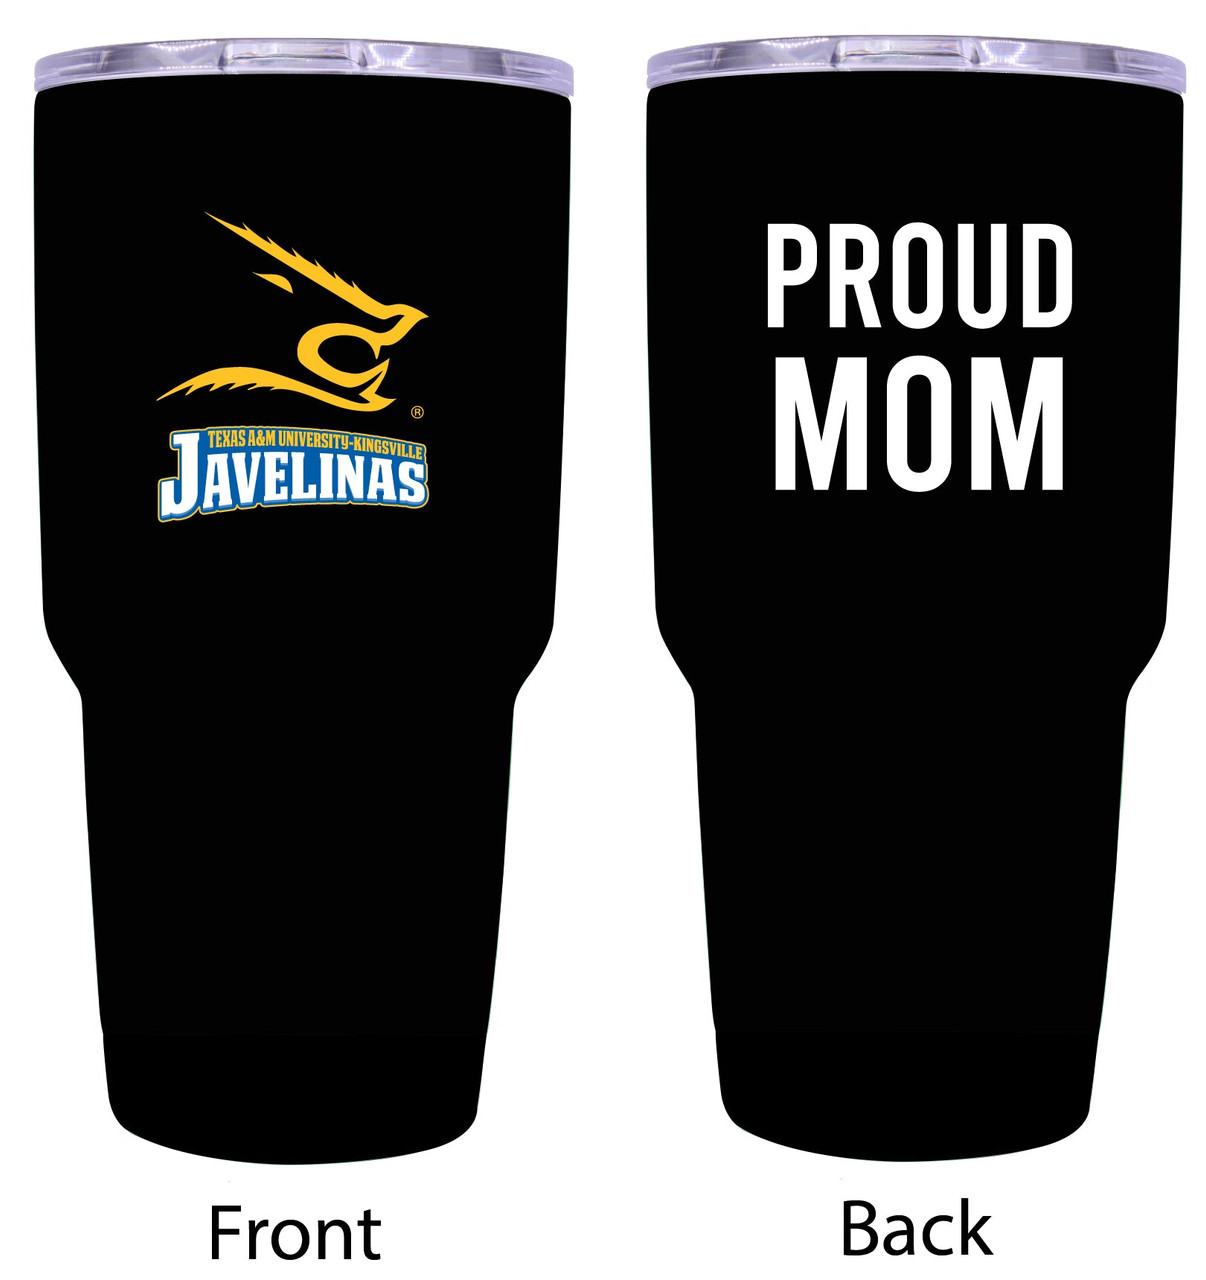 Texas A&M Kingsville Javelinas Proud Mom 24 oz Insulated Stainless Steel Tumblers Black.